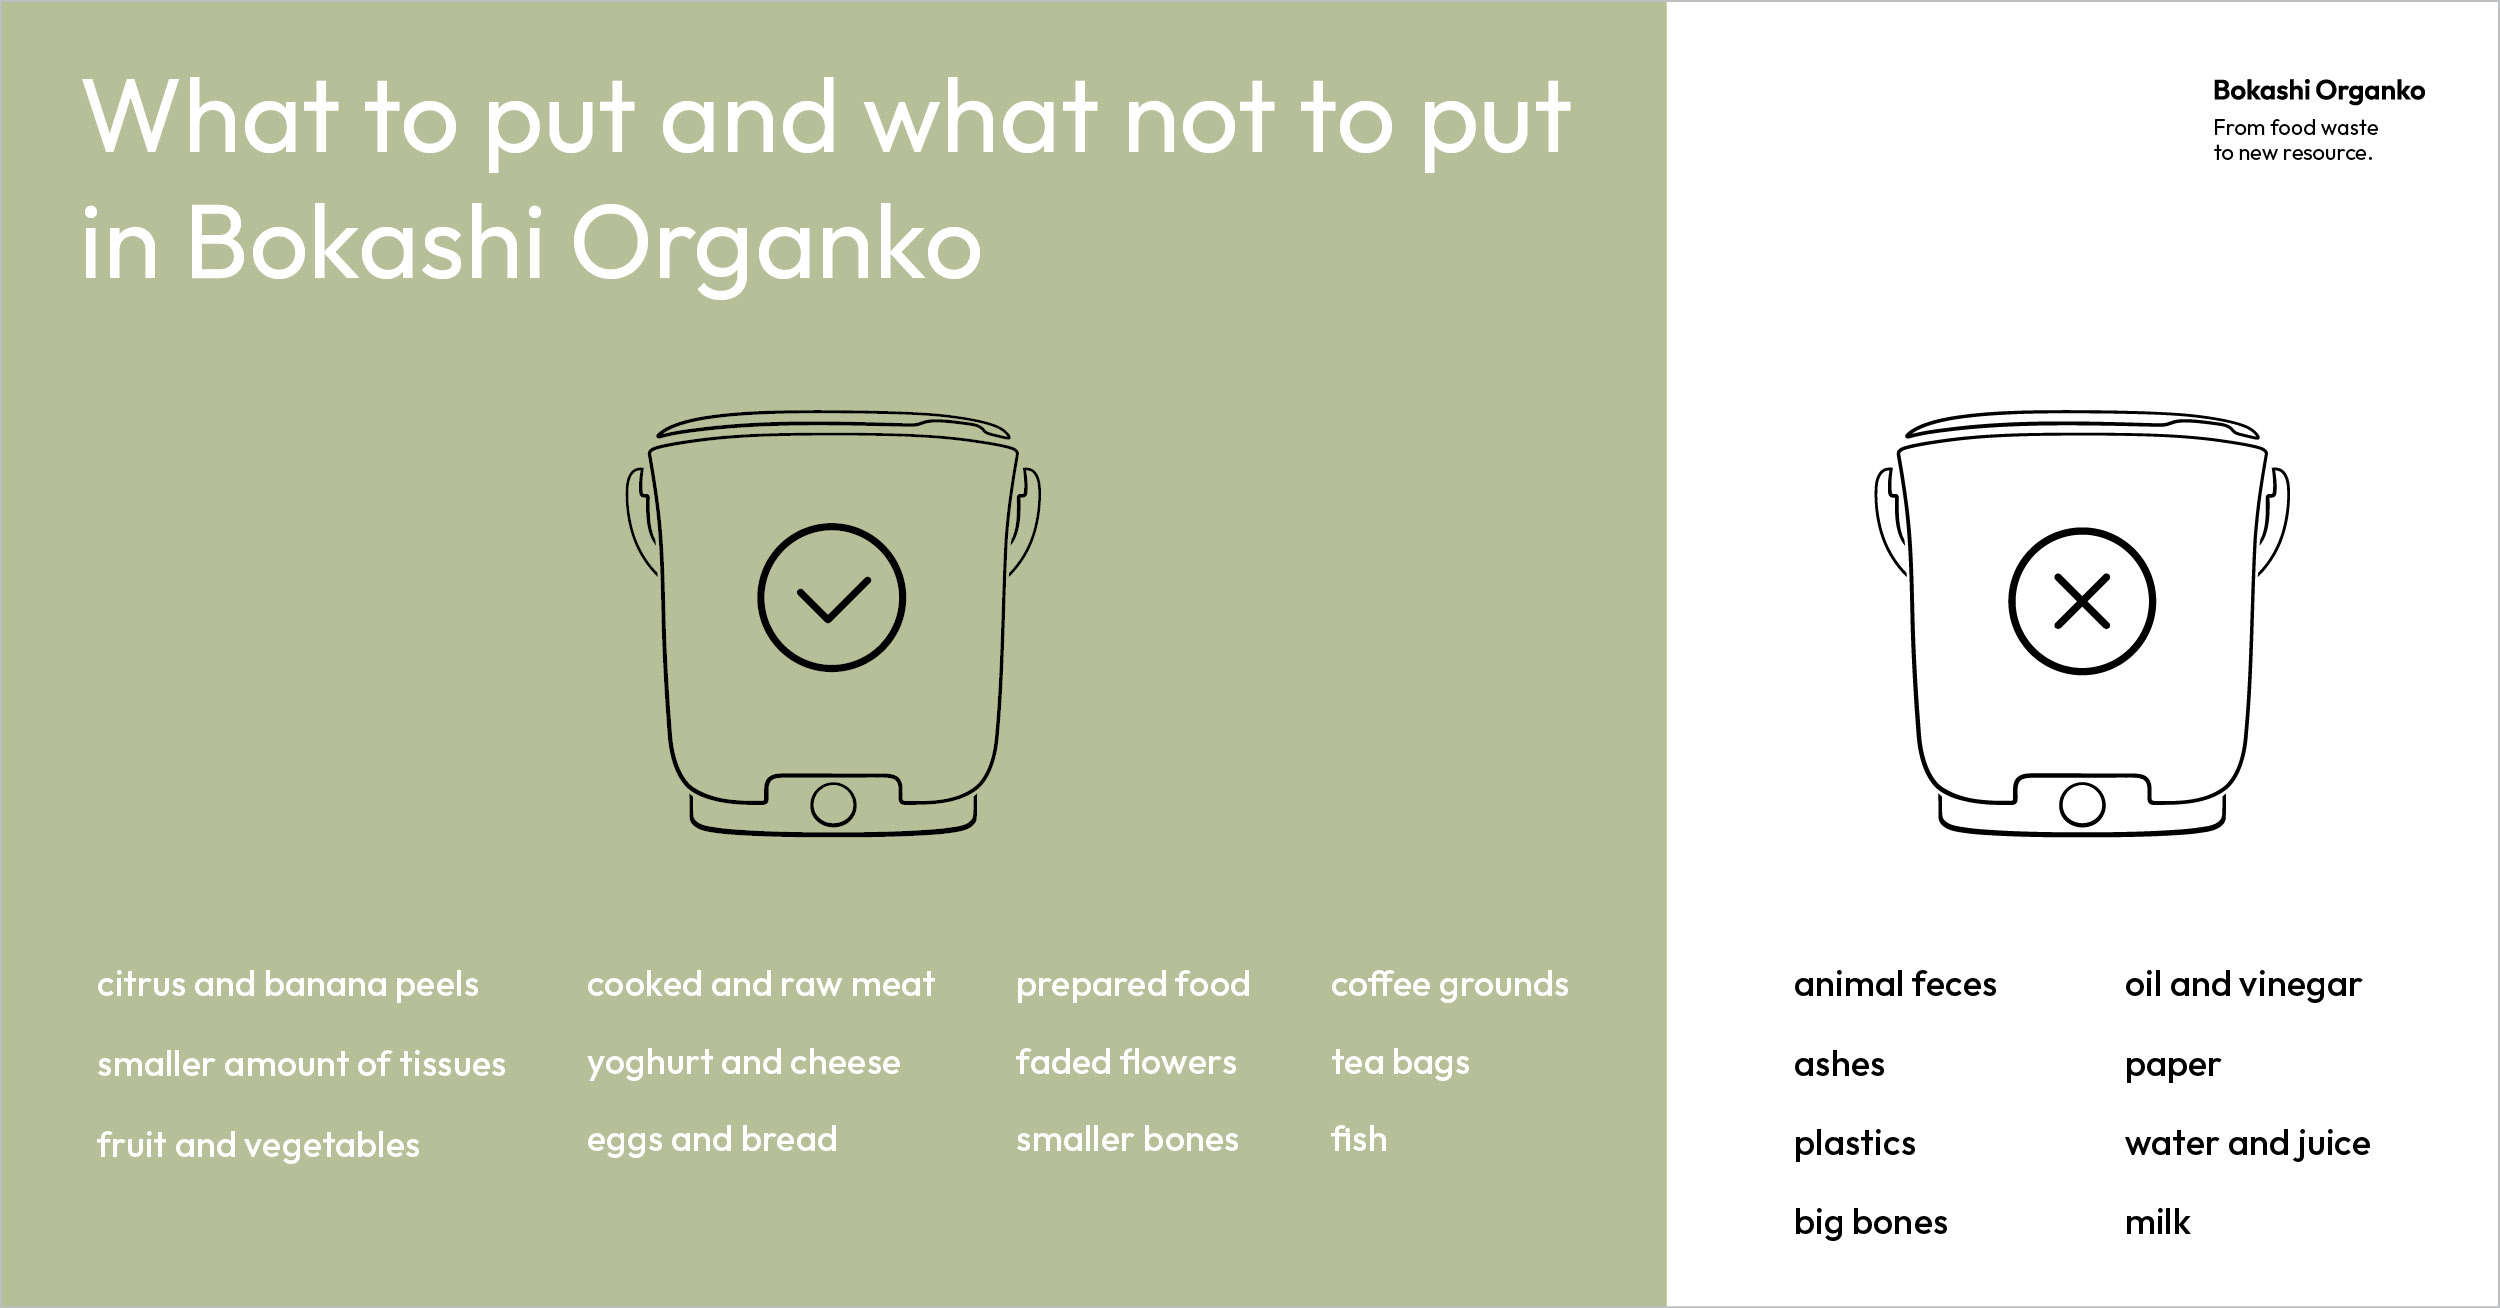 What to put and what not to put in Bokashi Organko